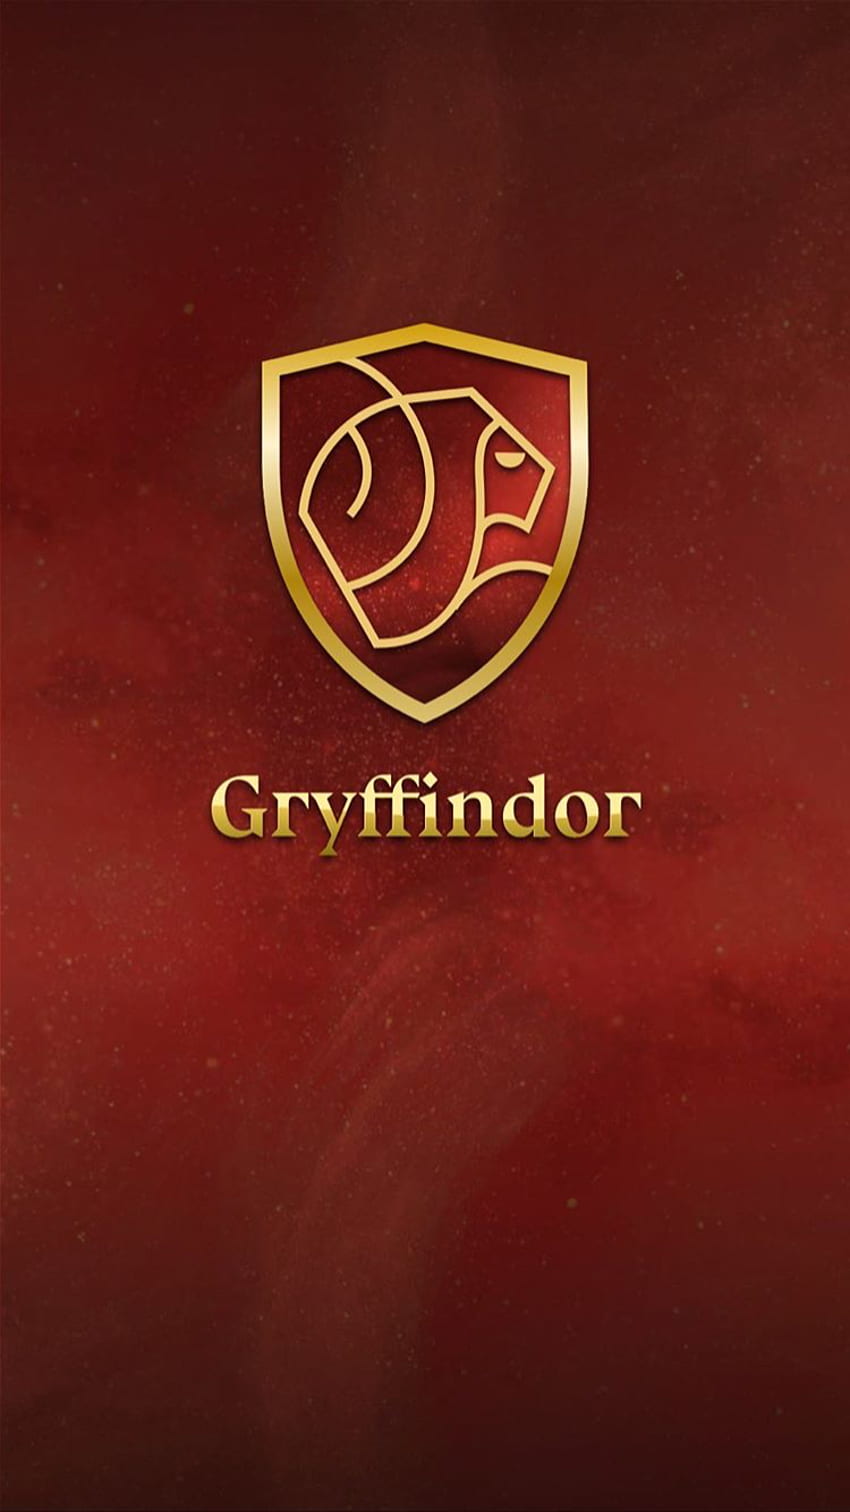 Harry Potter Wallpaper Gryffindor Quidditch Seeker Official Imported  European Wallpaper - Amazon.com